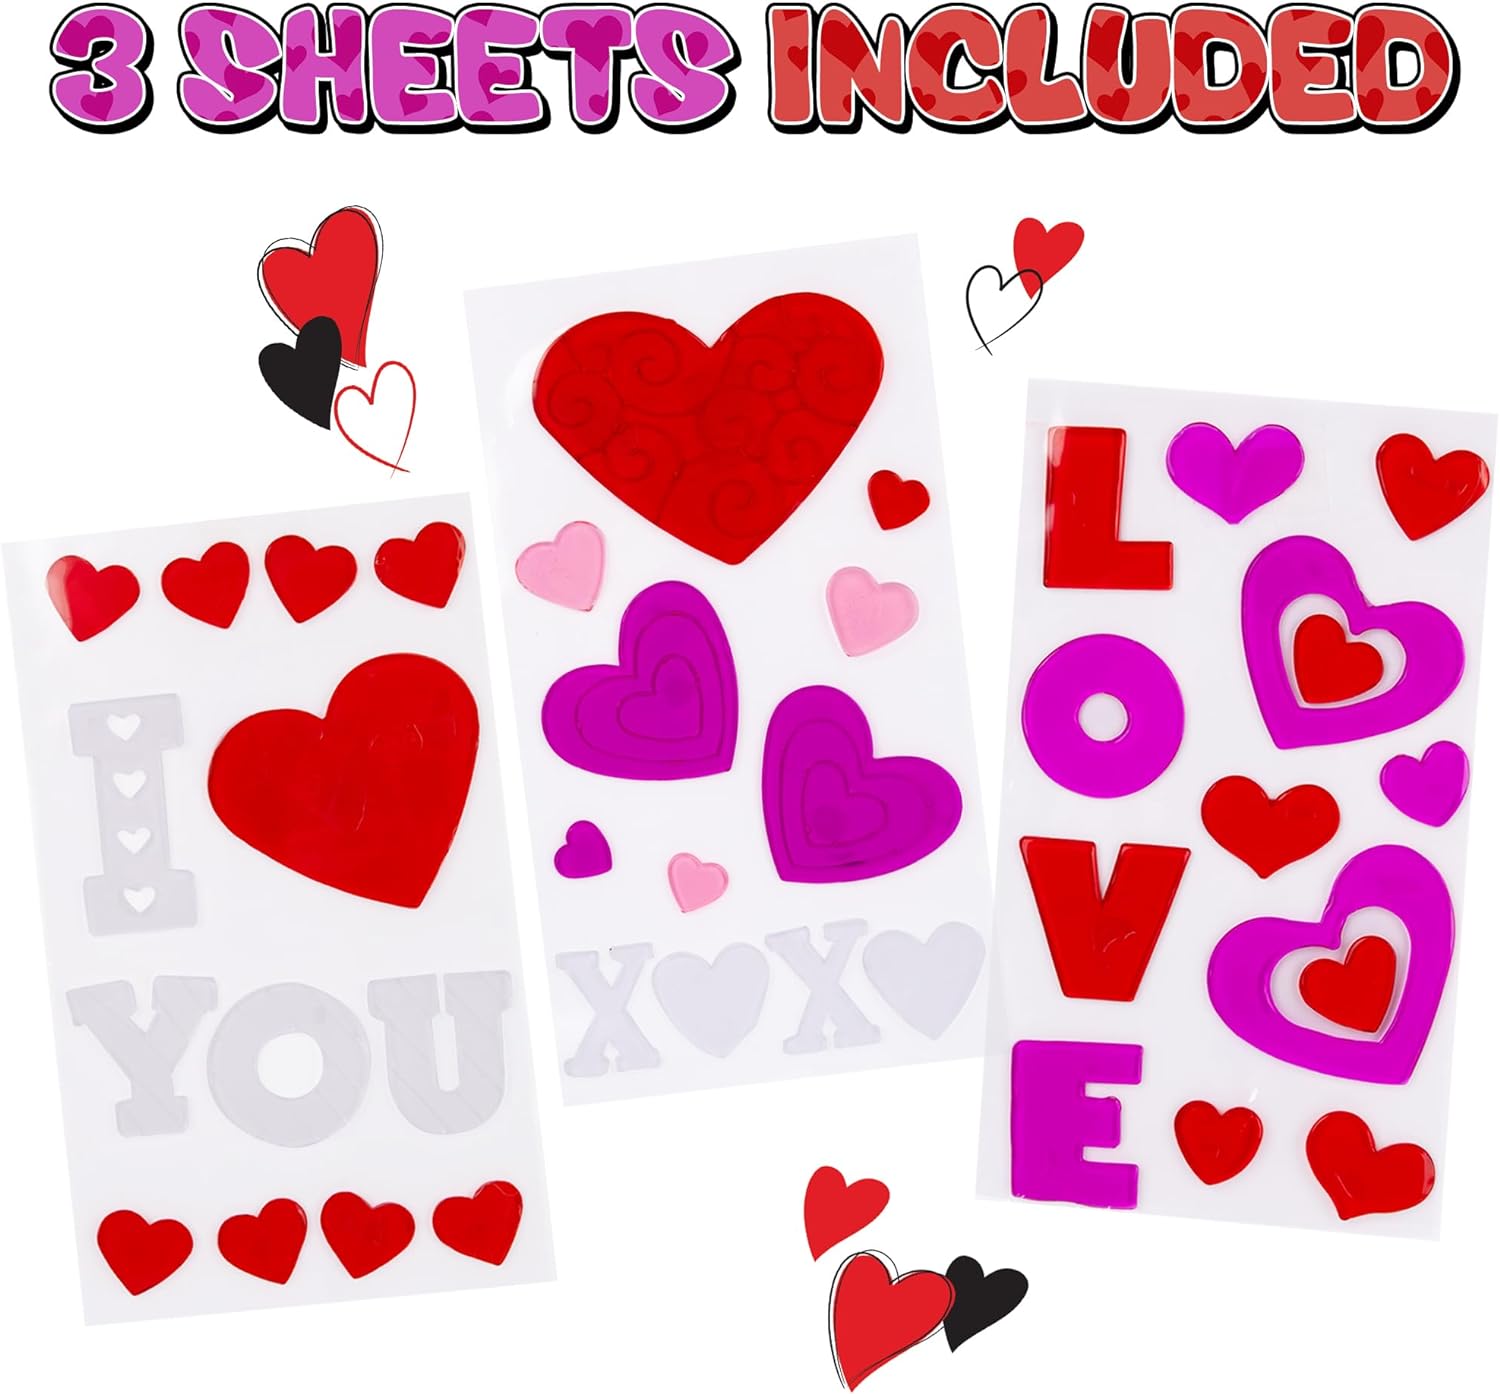 Valentines Day Window Clings - 39 Valentines Day Clings - Heart Window Clings in 3 Sheets - Assorted Heart Window Decals with Vibrant Colors - Valentines Day Window Decorations for Cute Decor